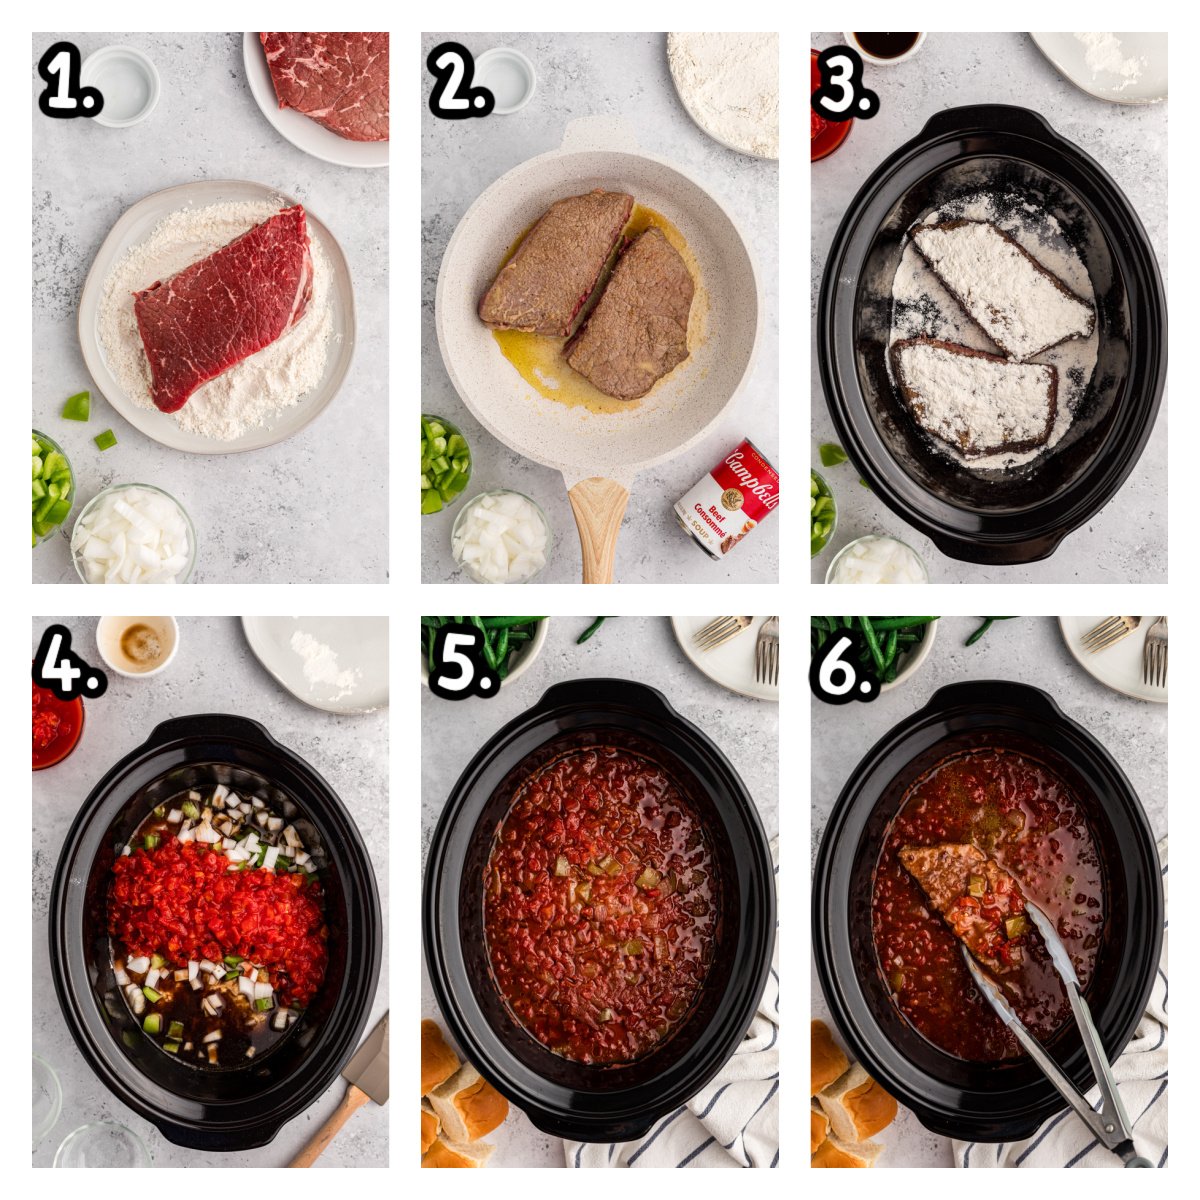 six images showing how to make swiss steak in a crockpot.